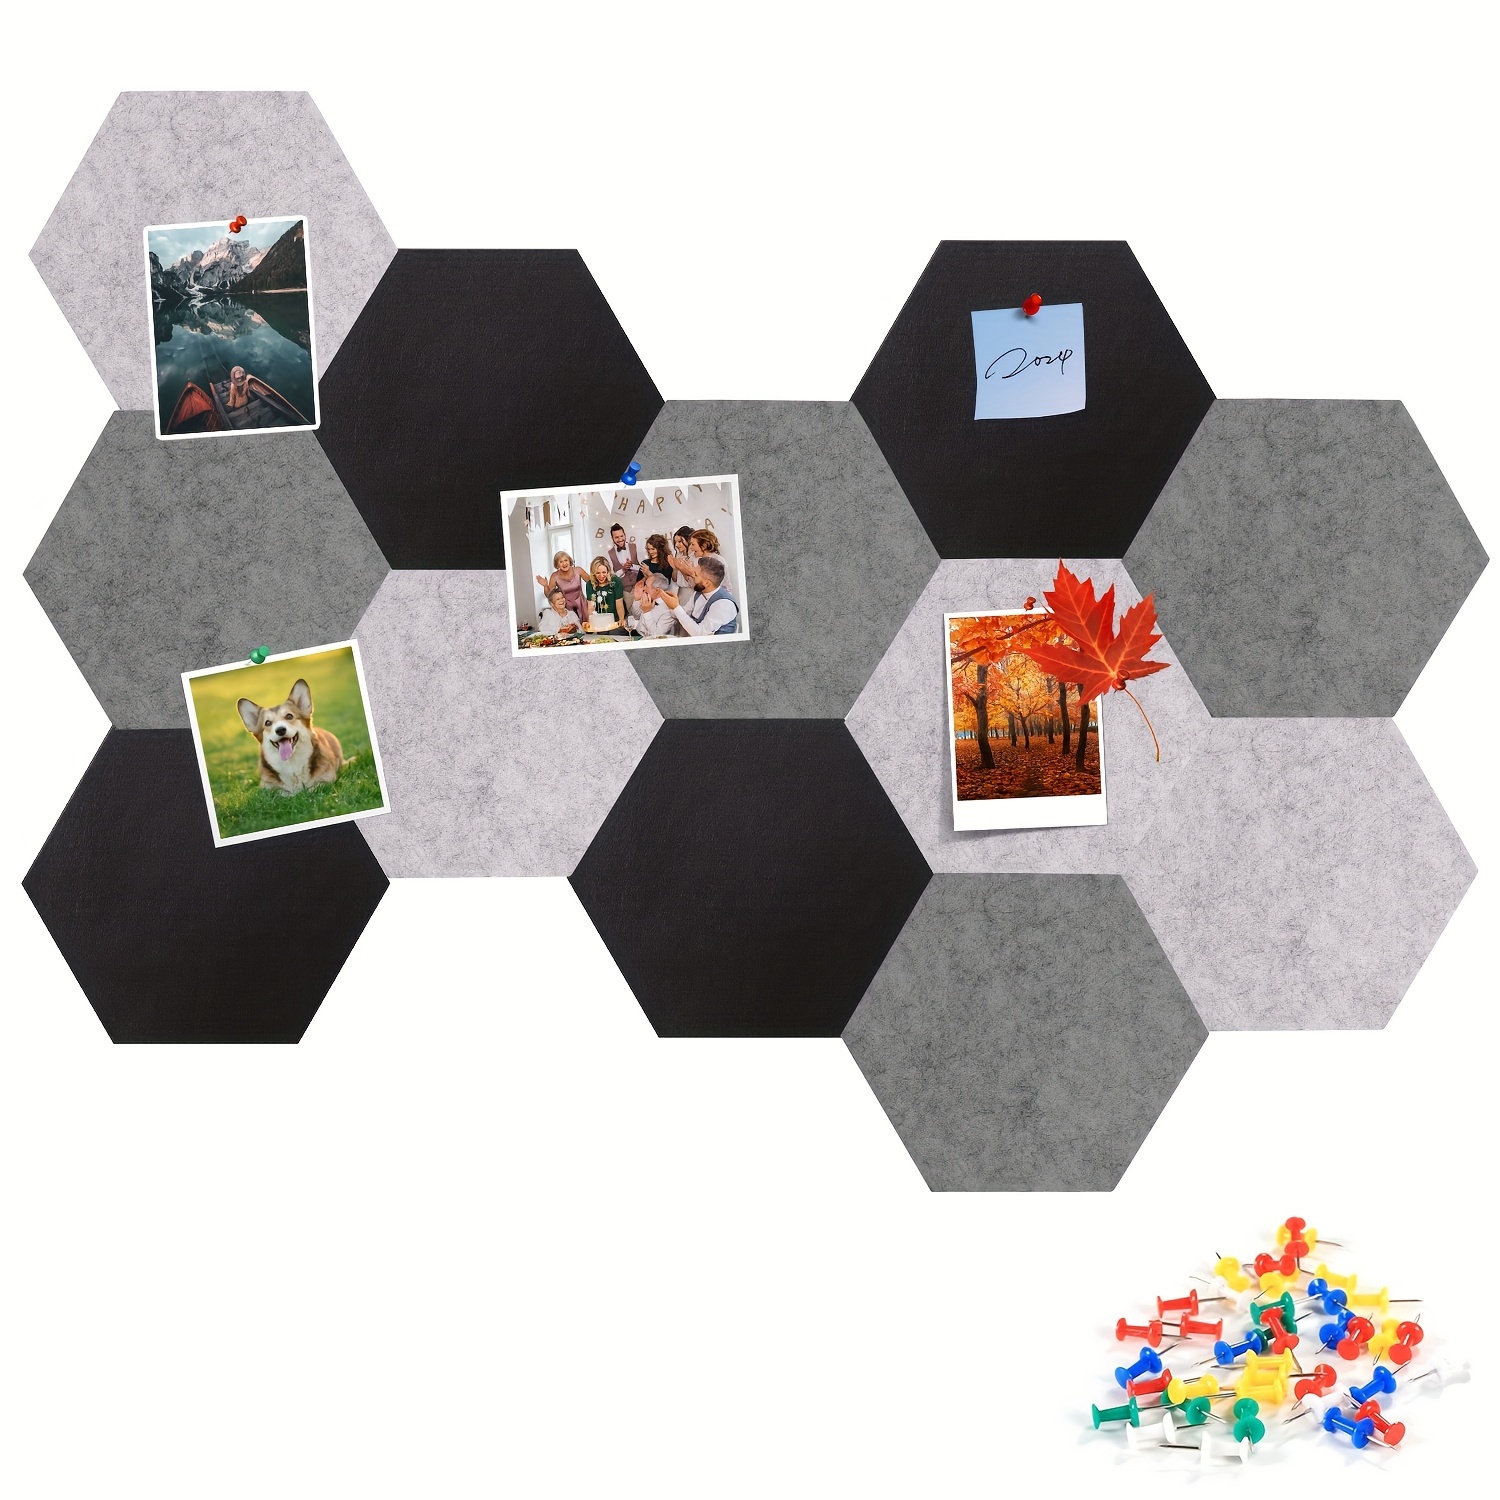 

12pcs Hexagon Cork Board With Pushpins, Self-adhesive Pin Board For Wall Decor, Memo Board, Notice Board For Classroom, Office, And Home Use